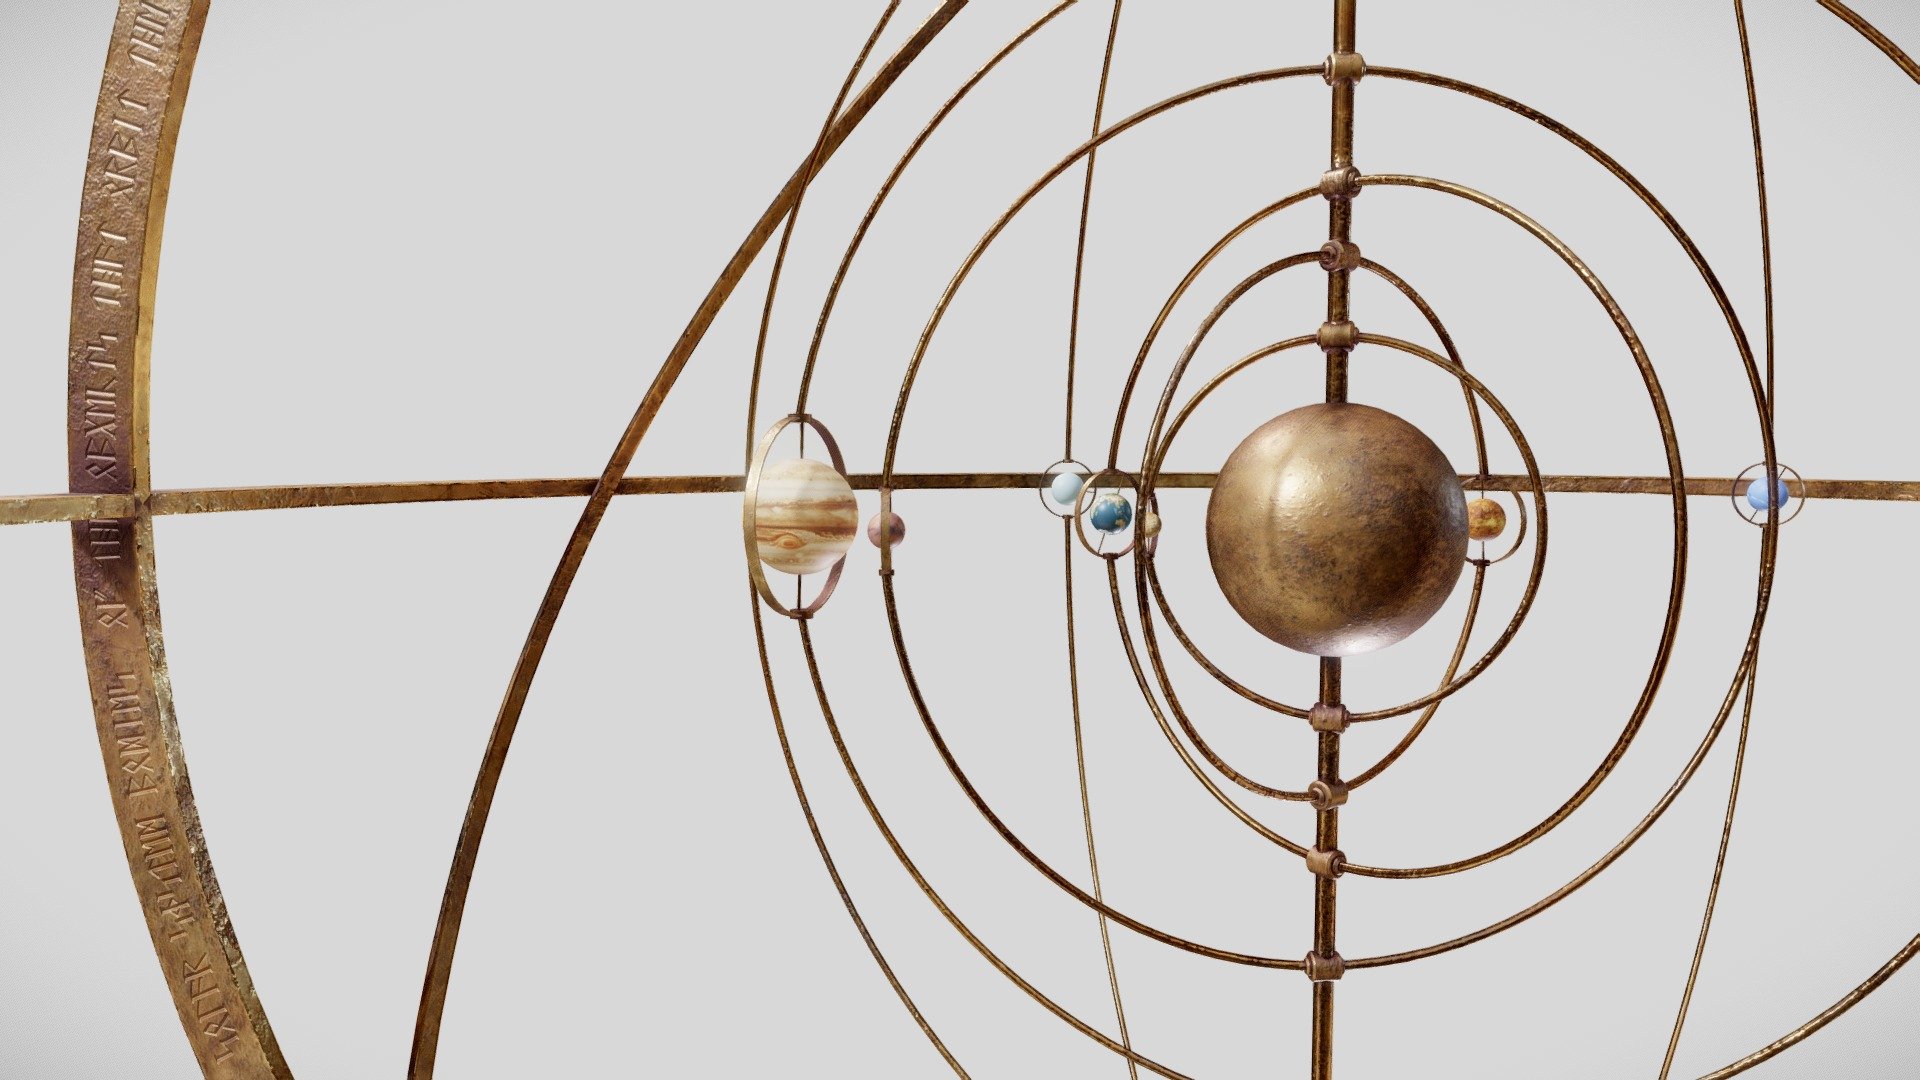 The Orrery - nine planet model of solar system.

SOFTWARE — MAYA, Substance Painter, CLIP STUDIO PAINT - The Orrery - Download Free 3D model by Amatsukast 3d model